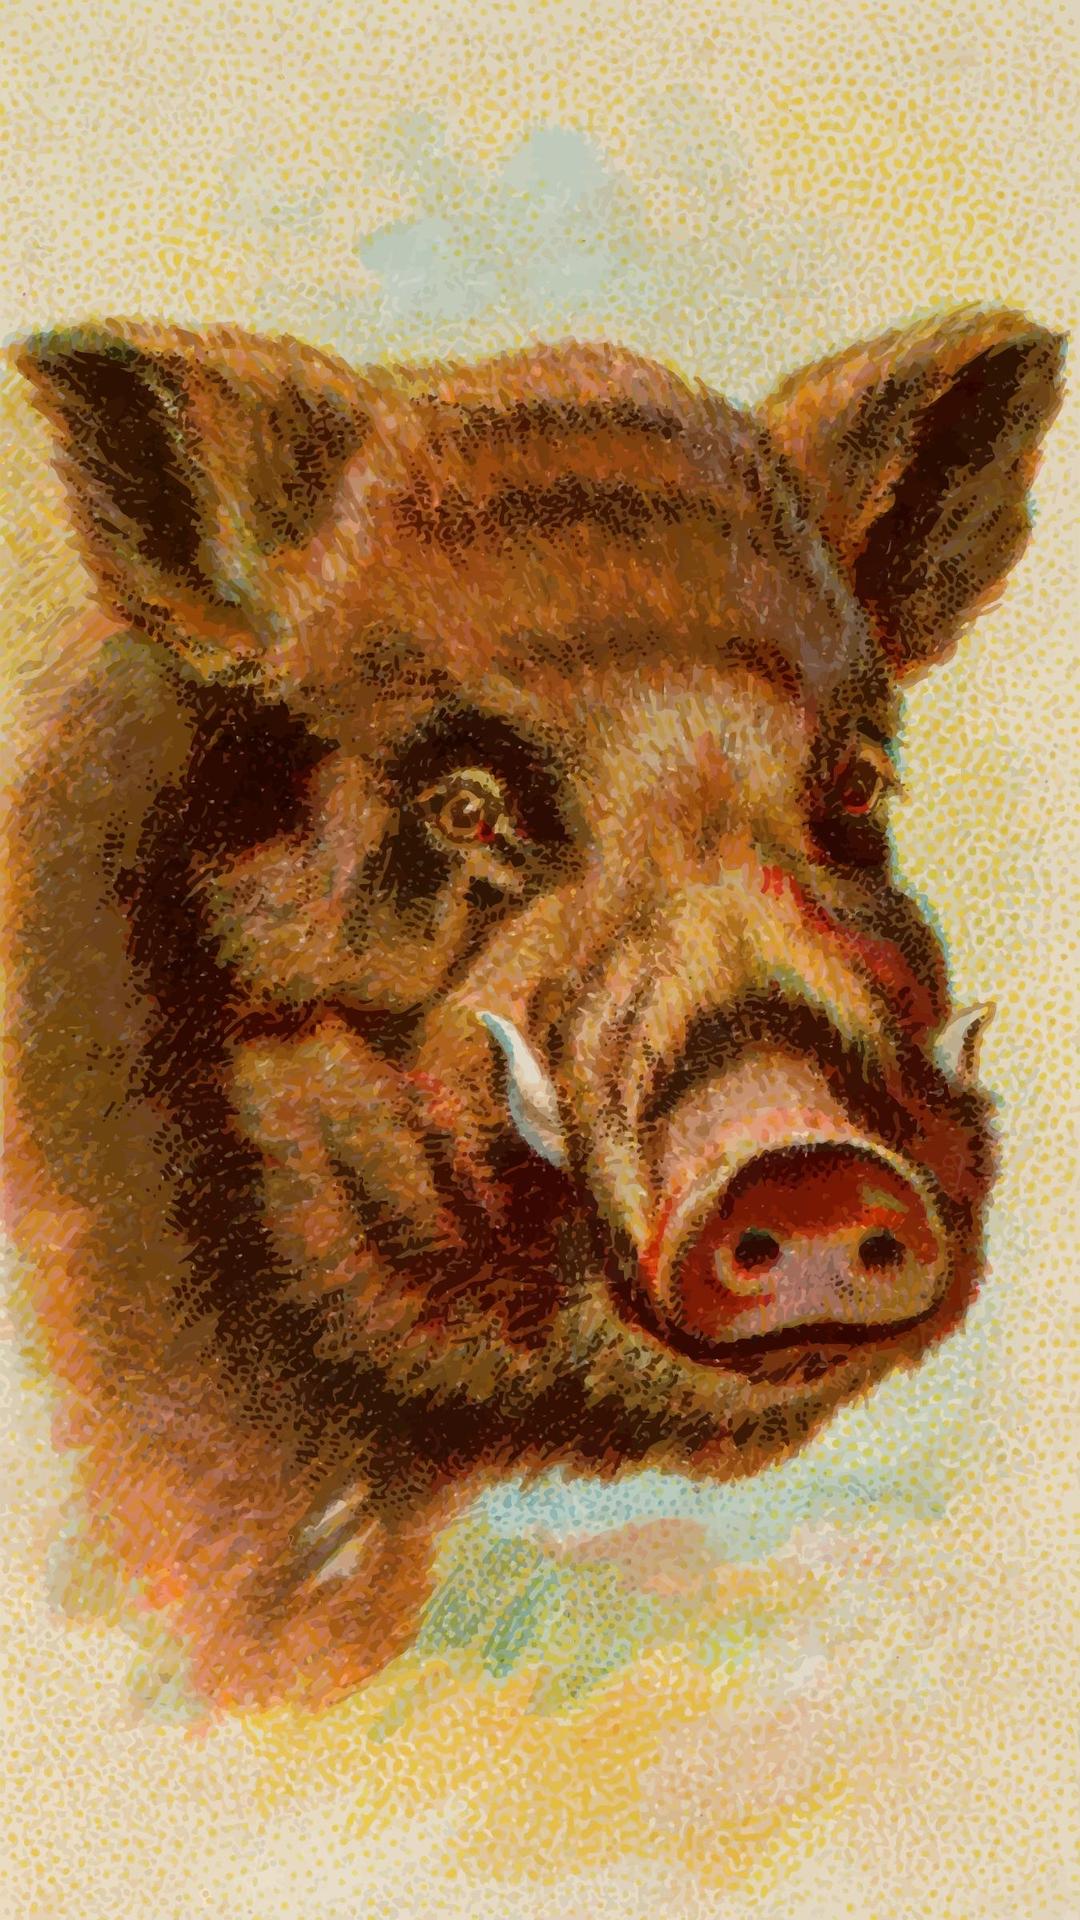 Cigarette card - Painted wild boar png transparent